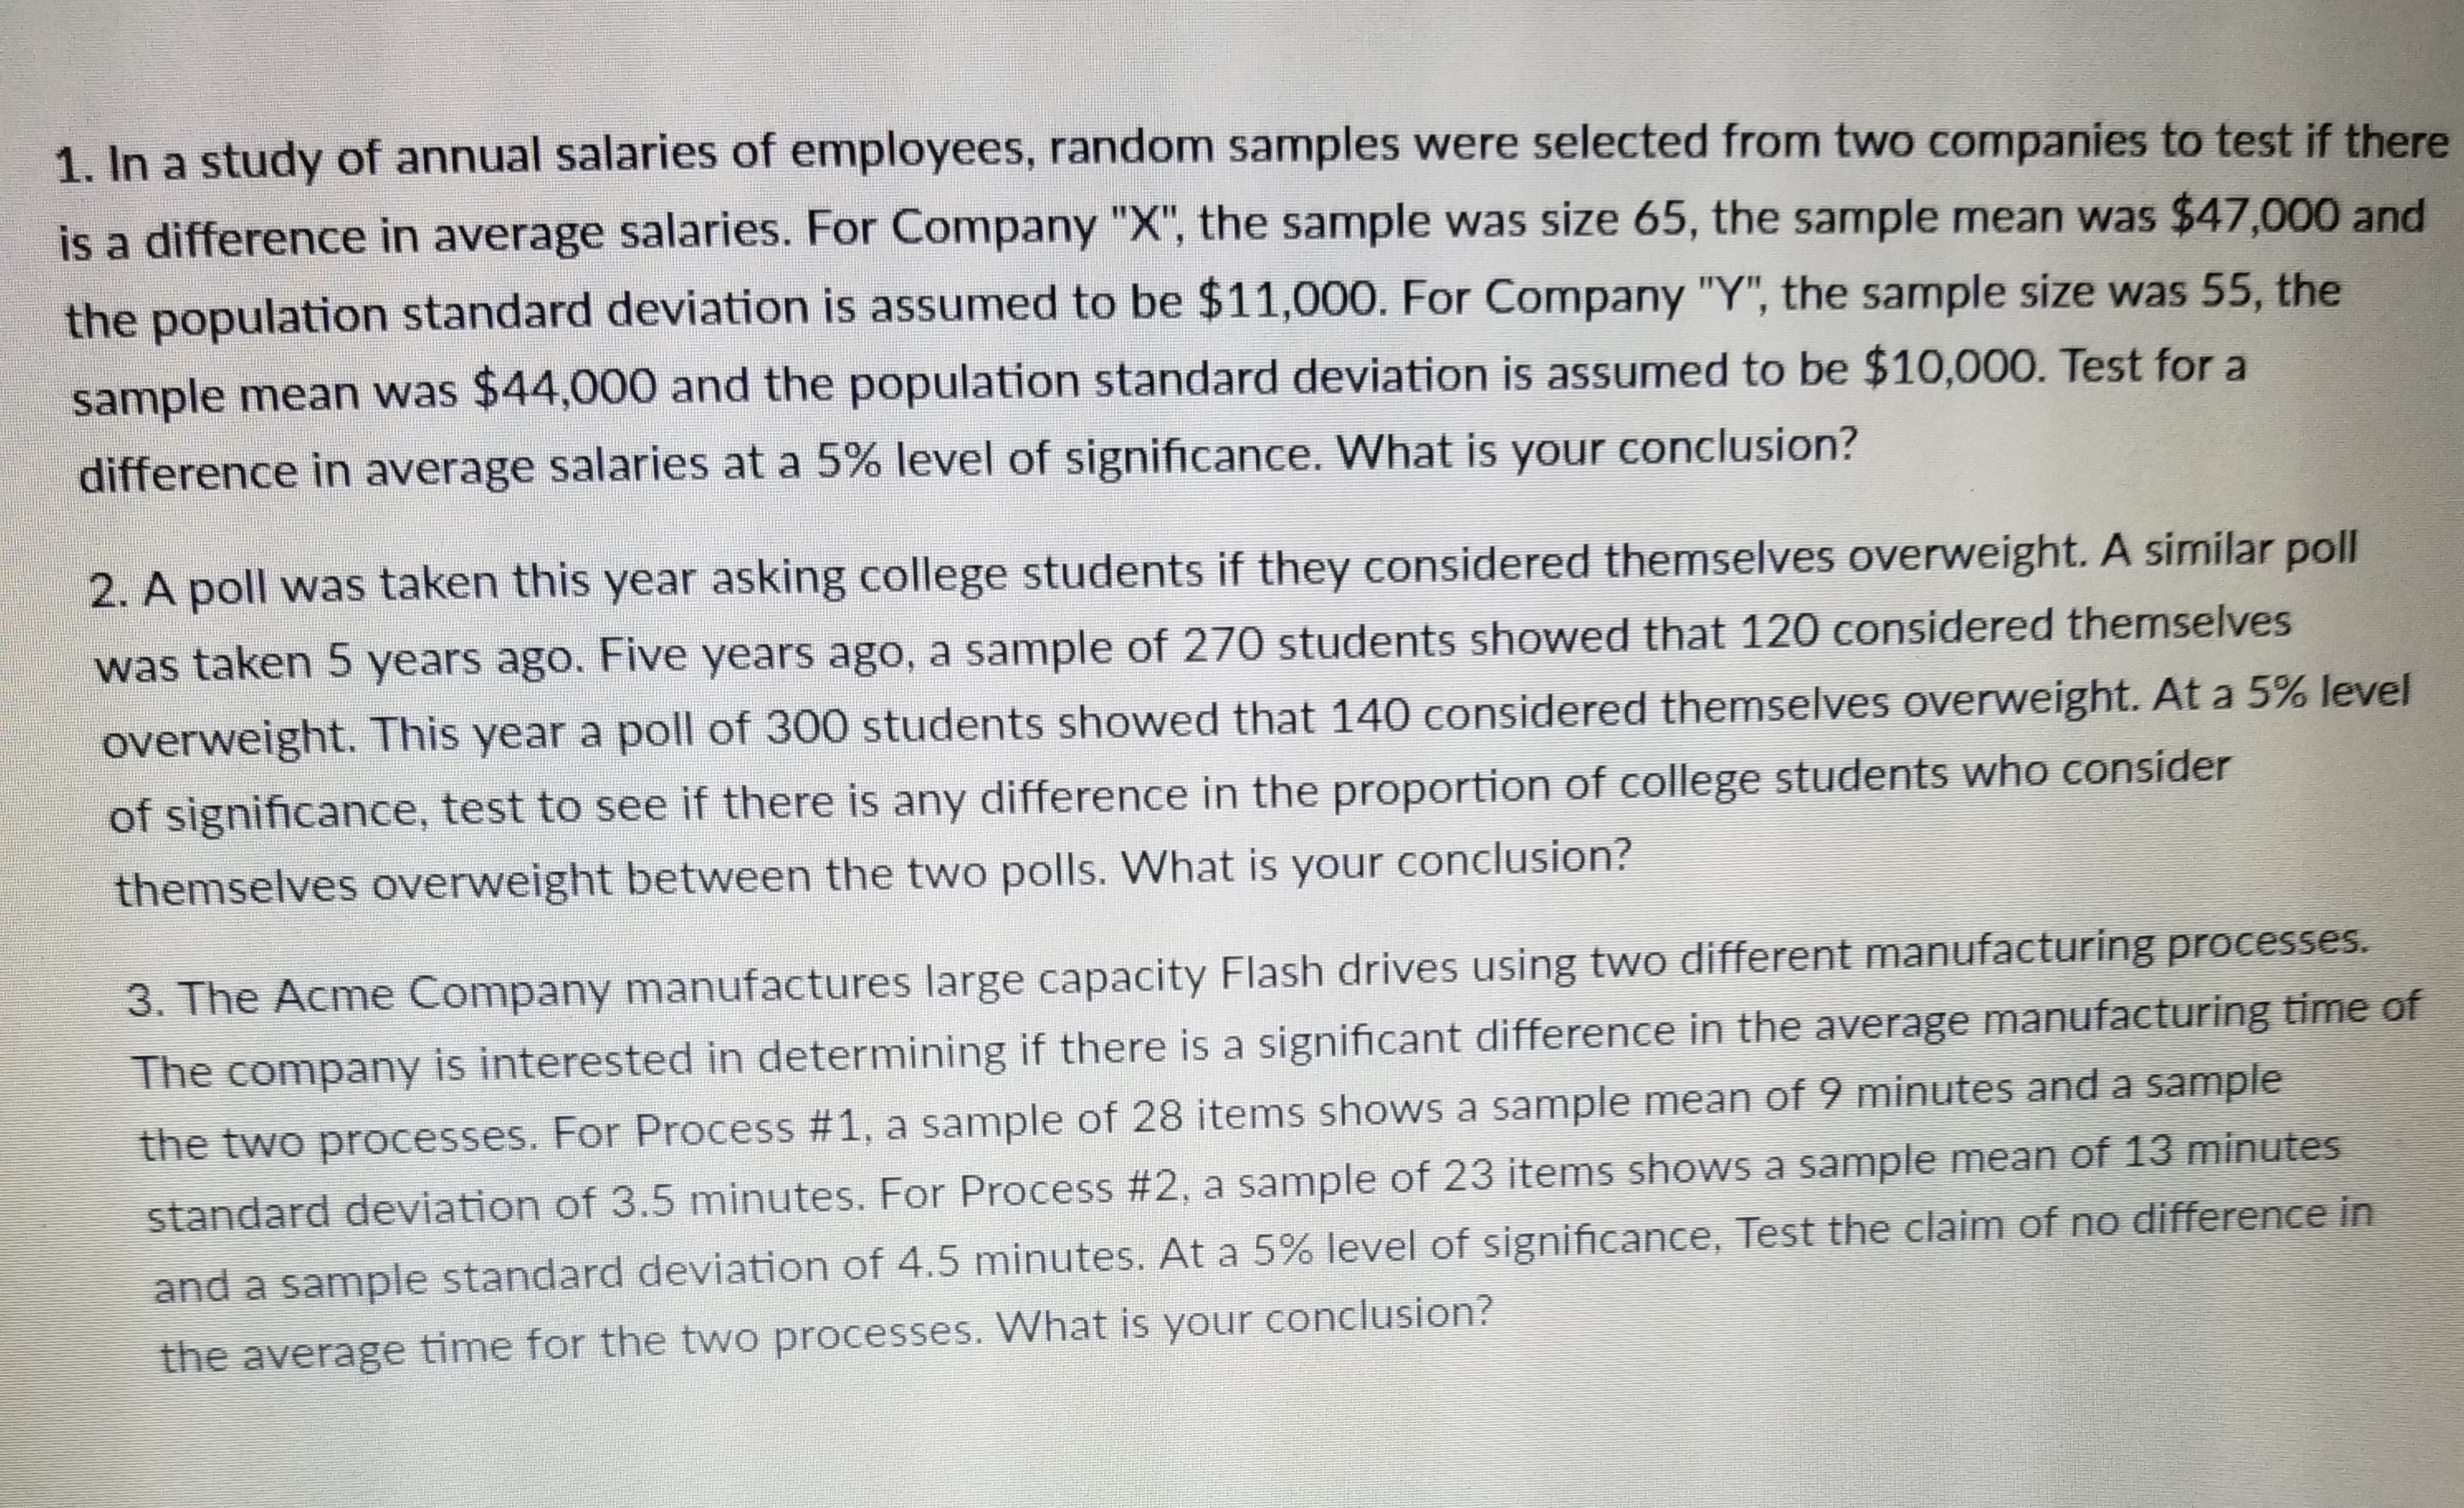 1. In a study of annual salaries of employees, random samples were selected from two companies to test if there
is a difference in average salaries. For Company "X", the sample was size 65, the sample mean was $47,000 and
the population standard deviation is assumed to be $11,000. For Company "Y"; the sample size was 55, the
sample mean was $44,000 and the population standard deviation is assumed to be $10,000. Test fora
difference in average salaries at a 5% level of significance, what is your conclusion?
poll was taken this year asking college students if they considered themselves overweight. A similar pol
as taken 5 years ago. Five years ago, a sample of 270 students showed that 120 considered themselves
overweight. This year a poll of 300 students showed that 140 co
nsidered themselves overweight. At a 5% level
of significance,
test to see if there is any difference in the proportion of college students who consider
themselves overweight between the two polls. What is your conclusion?
3. The Acme Company manufactures large capacity Flash drives using two different manufacturing processes
The company is interested in determining if there is a significant difference in the average manufacturing time of
the two processes. For Process #1, a sample of 28 items shows a sample mean of 9 minutes and a sample
standard deviation of 3.5 minutes. For Process #2, a sample of 23 items shows a sample mean of 13 minutes
and a sample standard deviation of 4.5 minutes. At a 5% level of significance, Test the claim of no difference in
the average time for the two processes. What is your conclusion?
